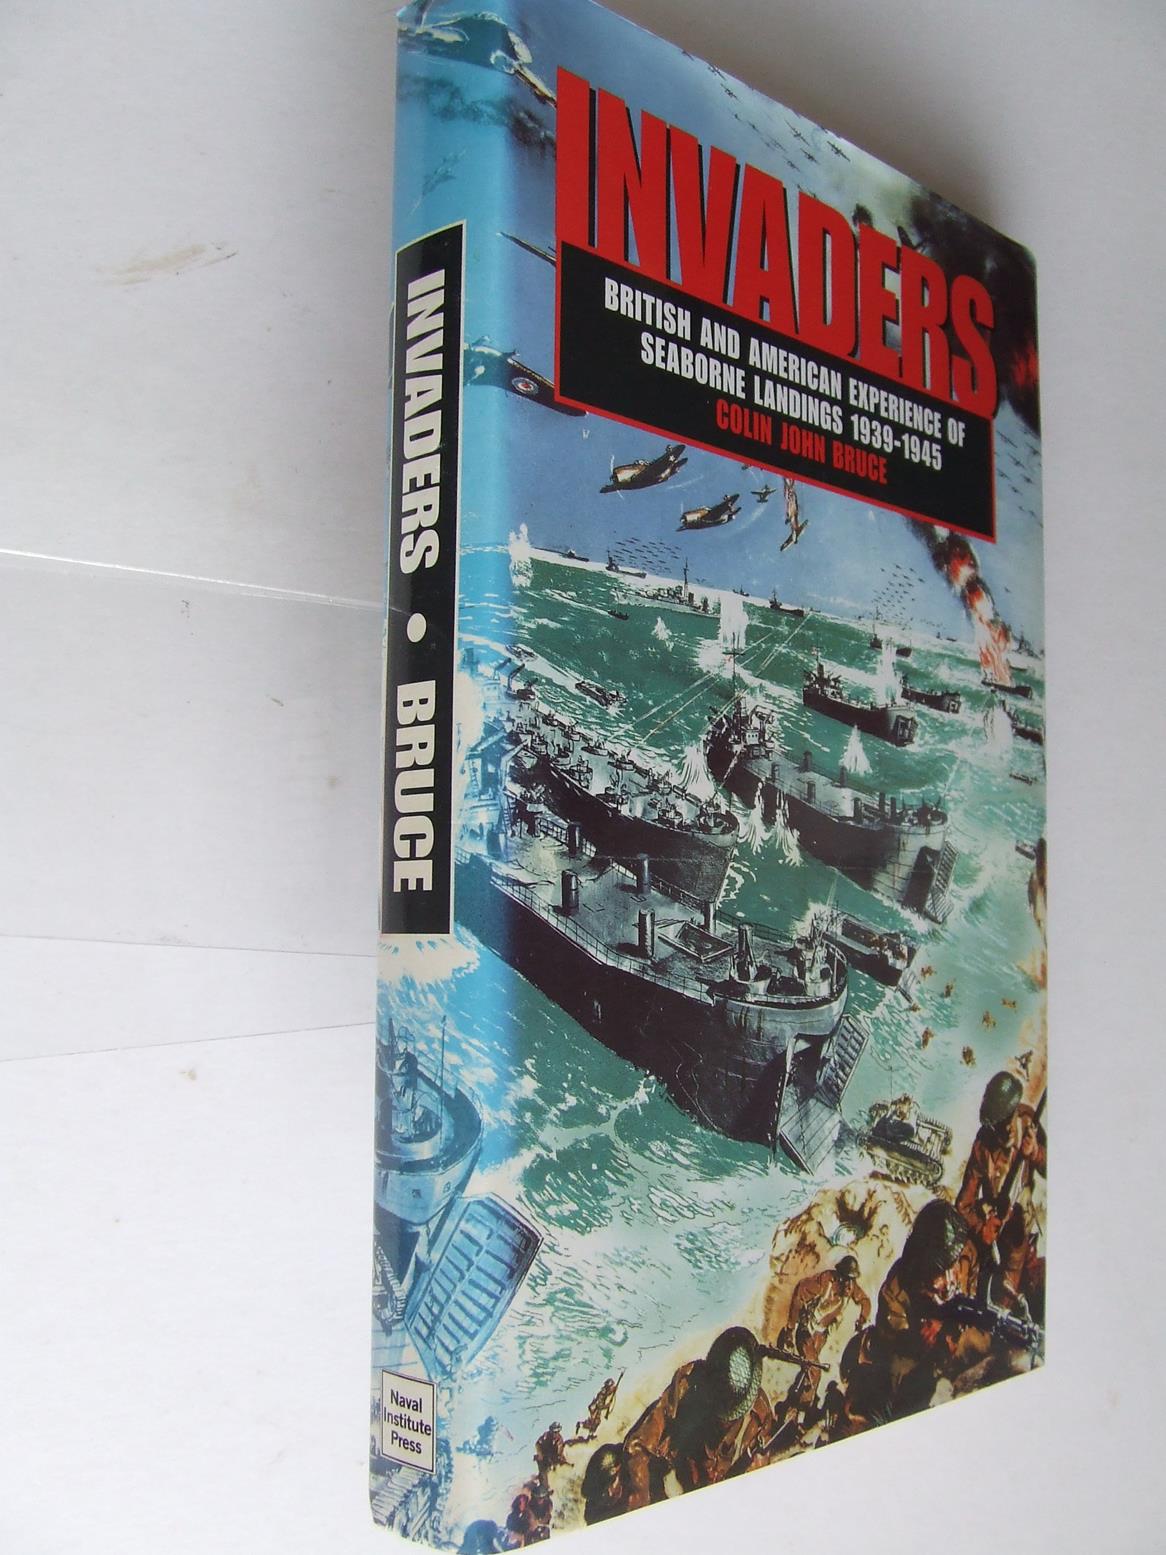 Invaders, British and American experience of seaborne landings 1939-1945